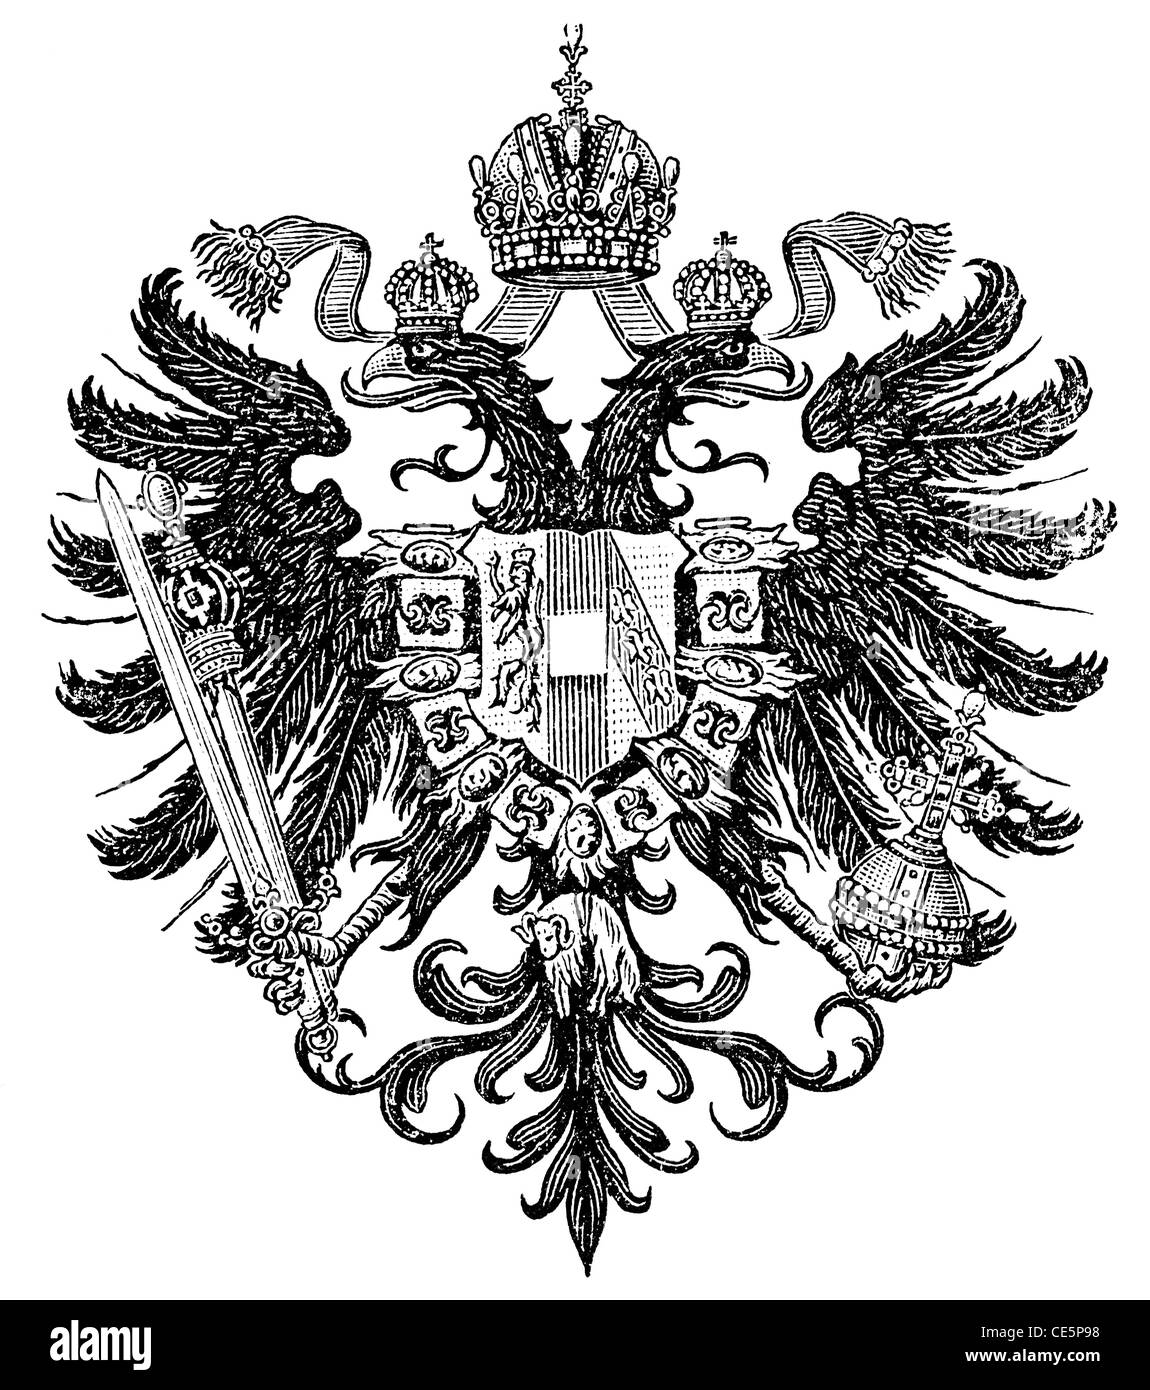 Smaller coat of arms of the Empire of Austria form Congress of Vienna 1815-1867 (Austro-Hungarian Monarchy). Stock Photo